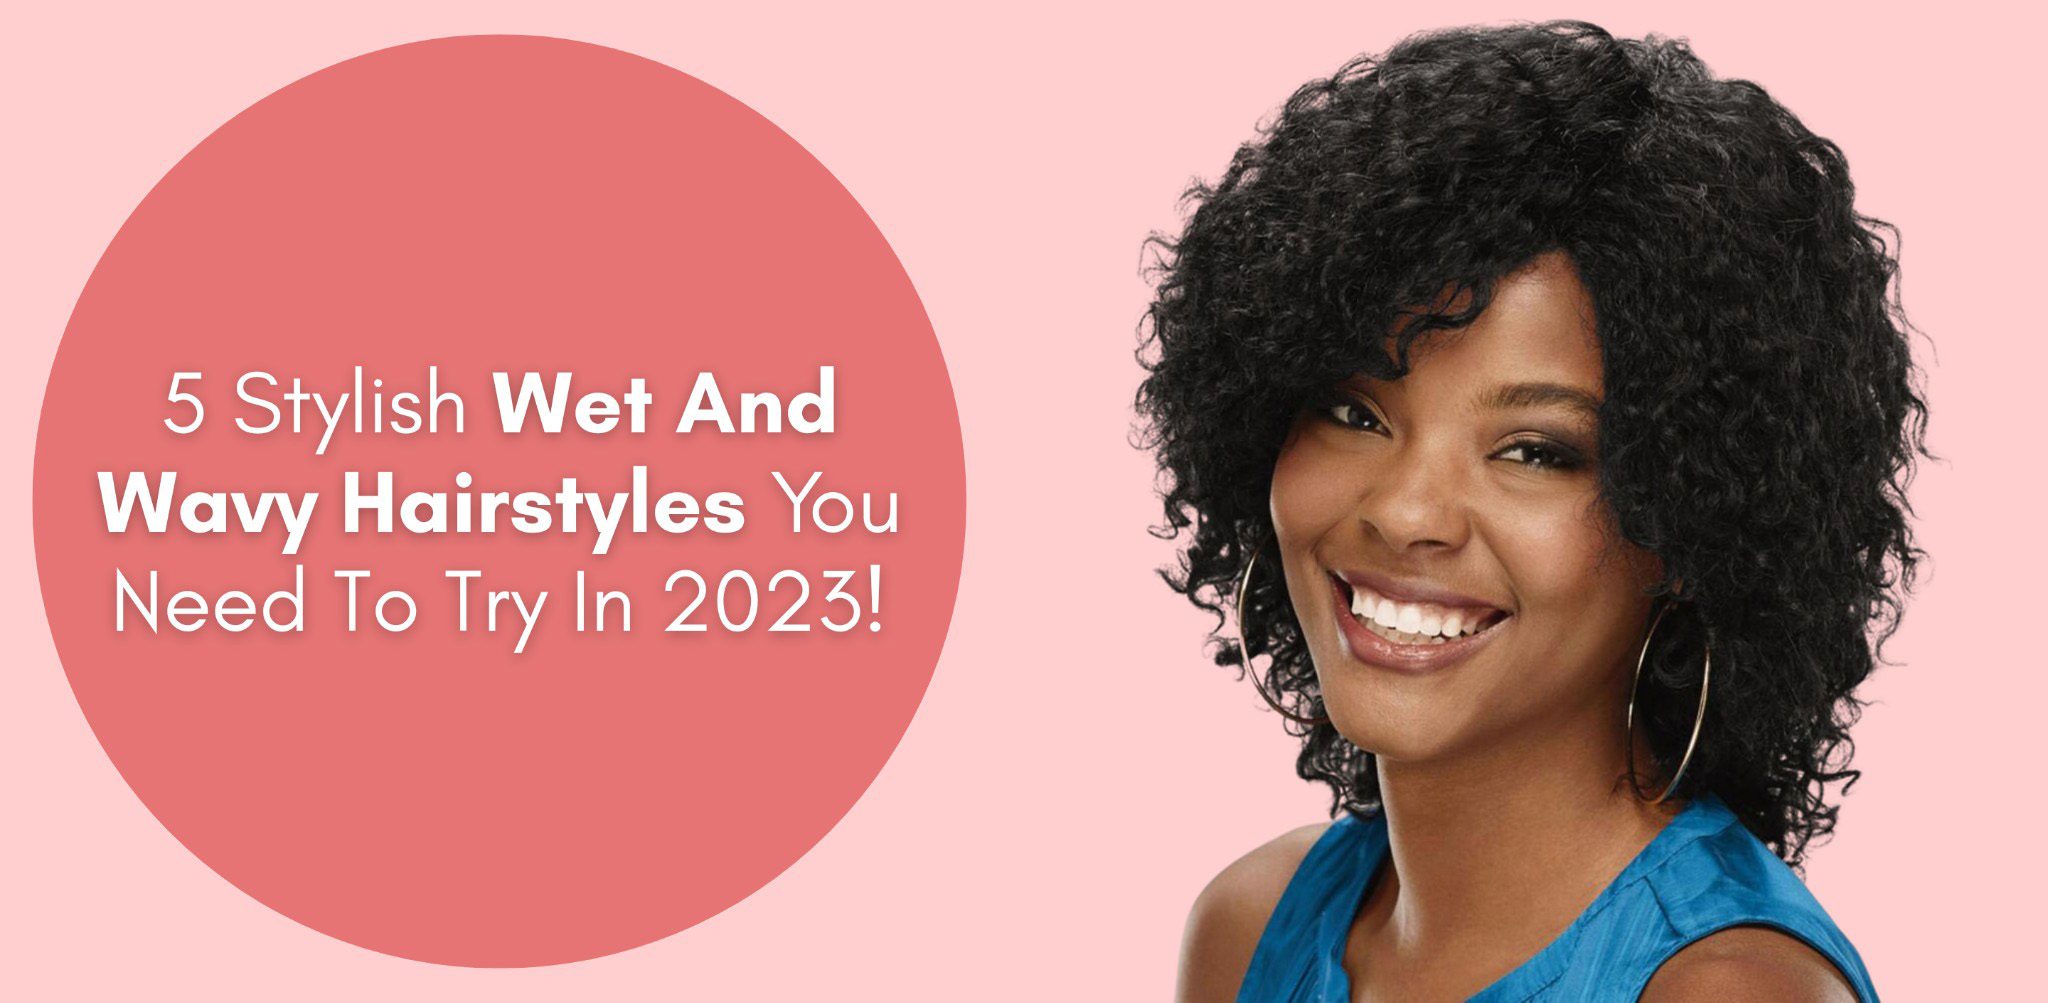 5 Stylish Wet And Wavy Hairstyles You Need To Try In 2023!